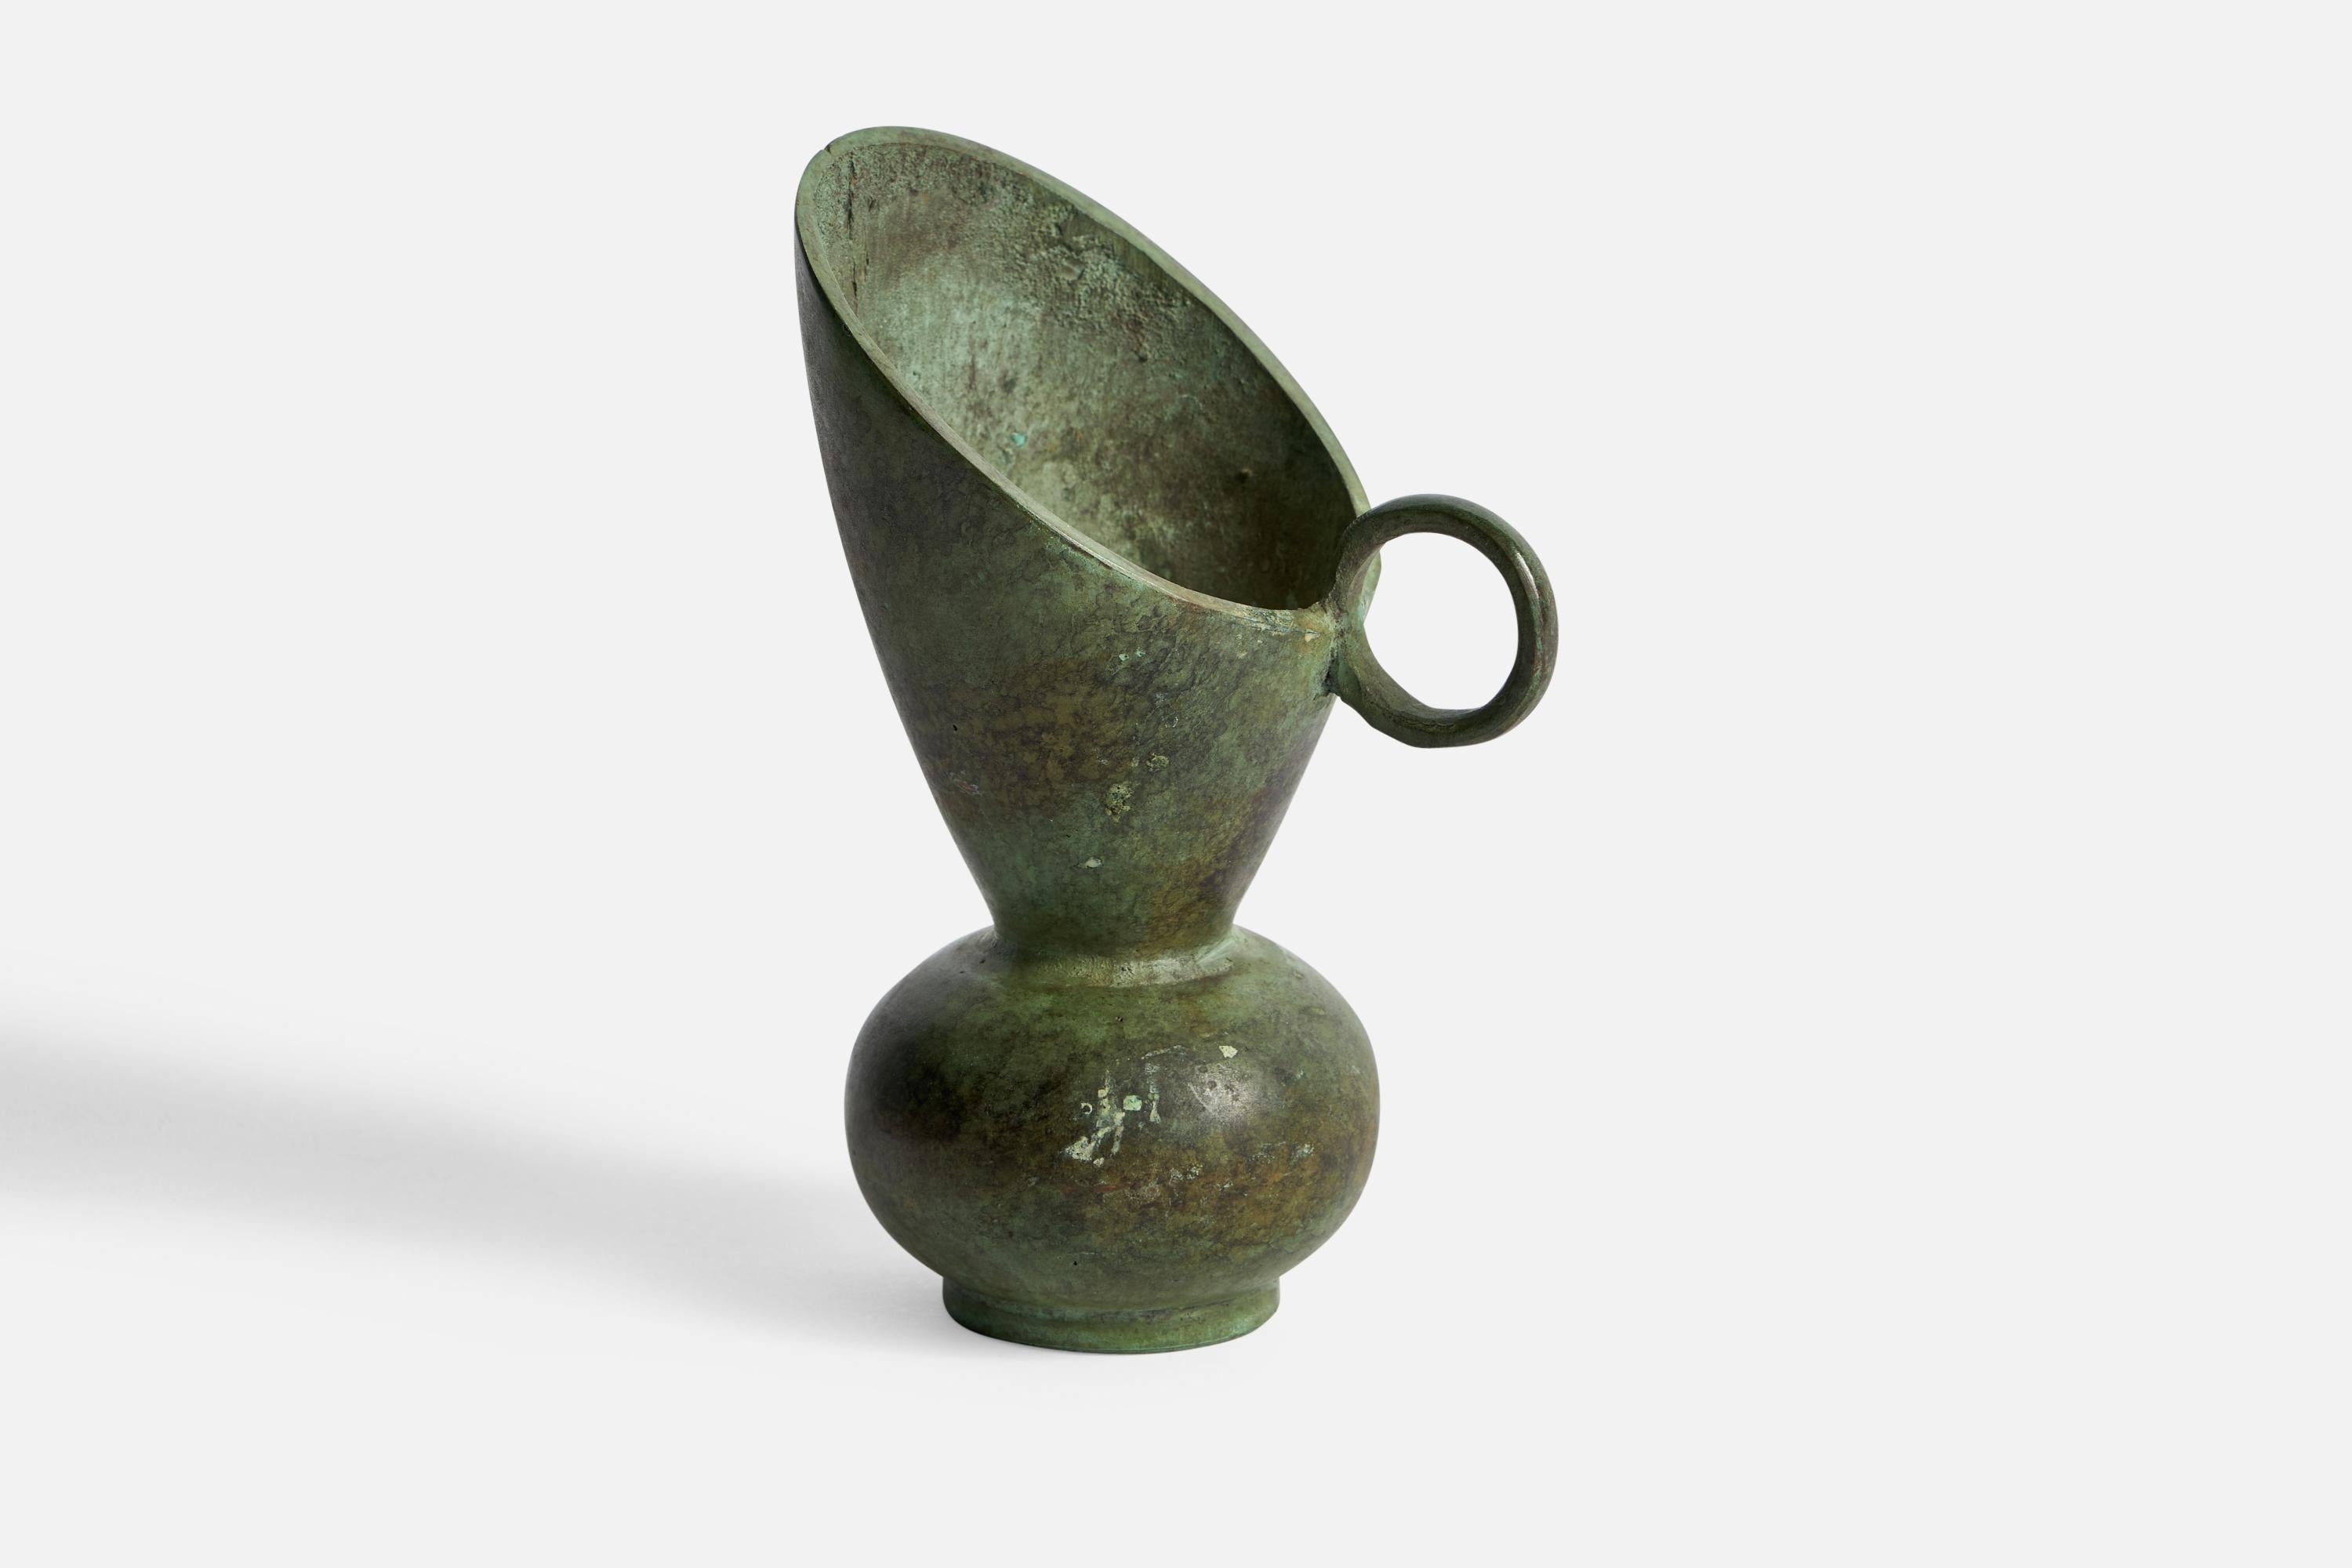 A small bronze pitcher designed and produced in Sweden, c. 1930s.